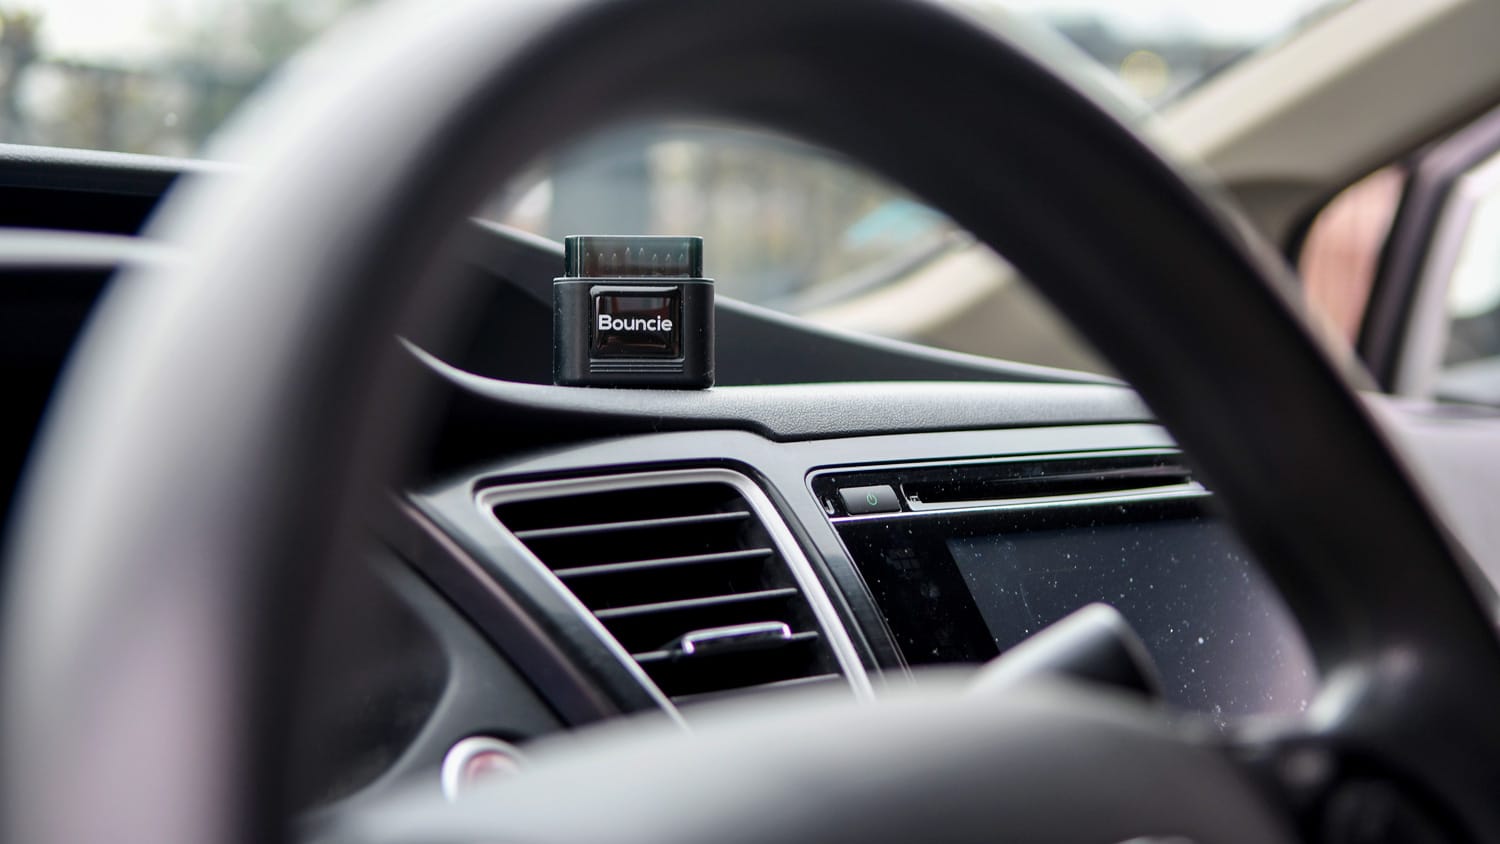 Identifying The Appearance Of GPS Trackers On Cars